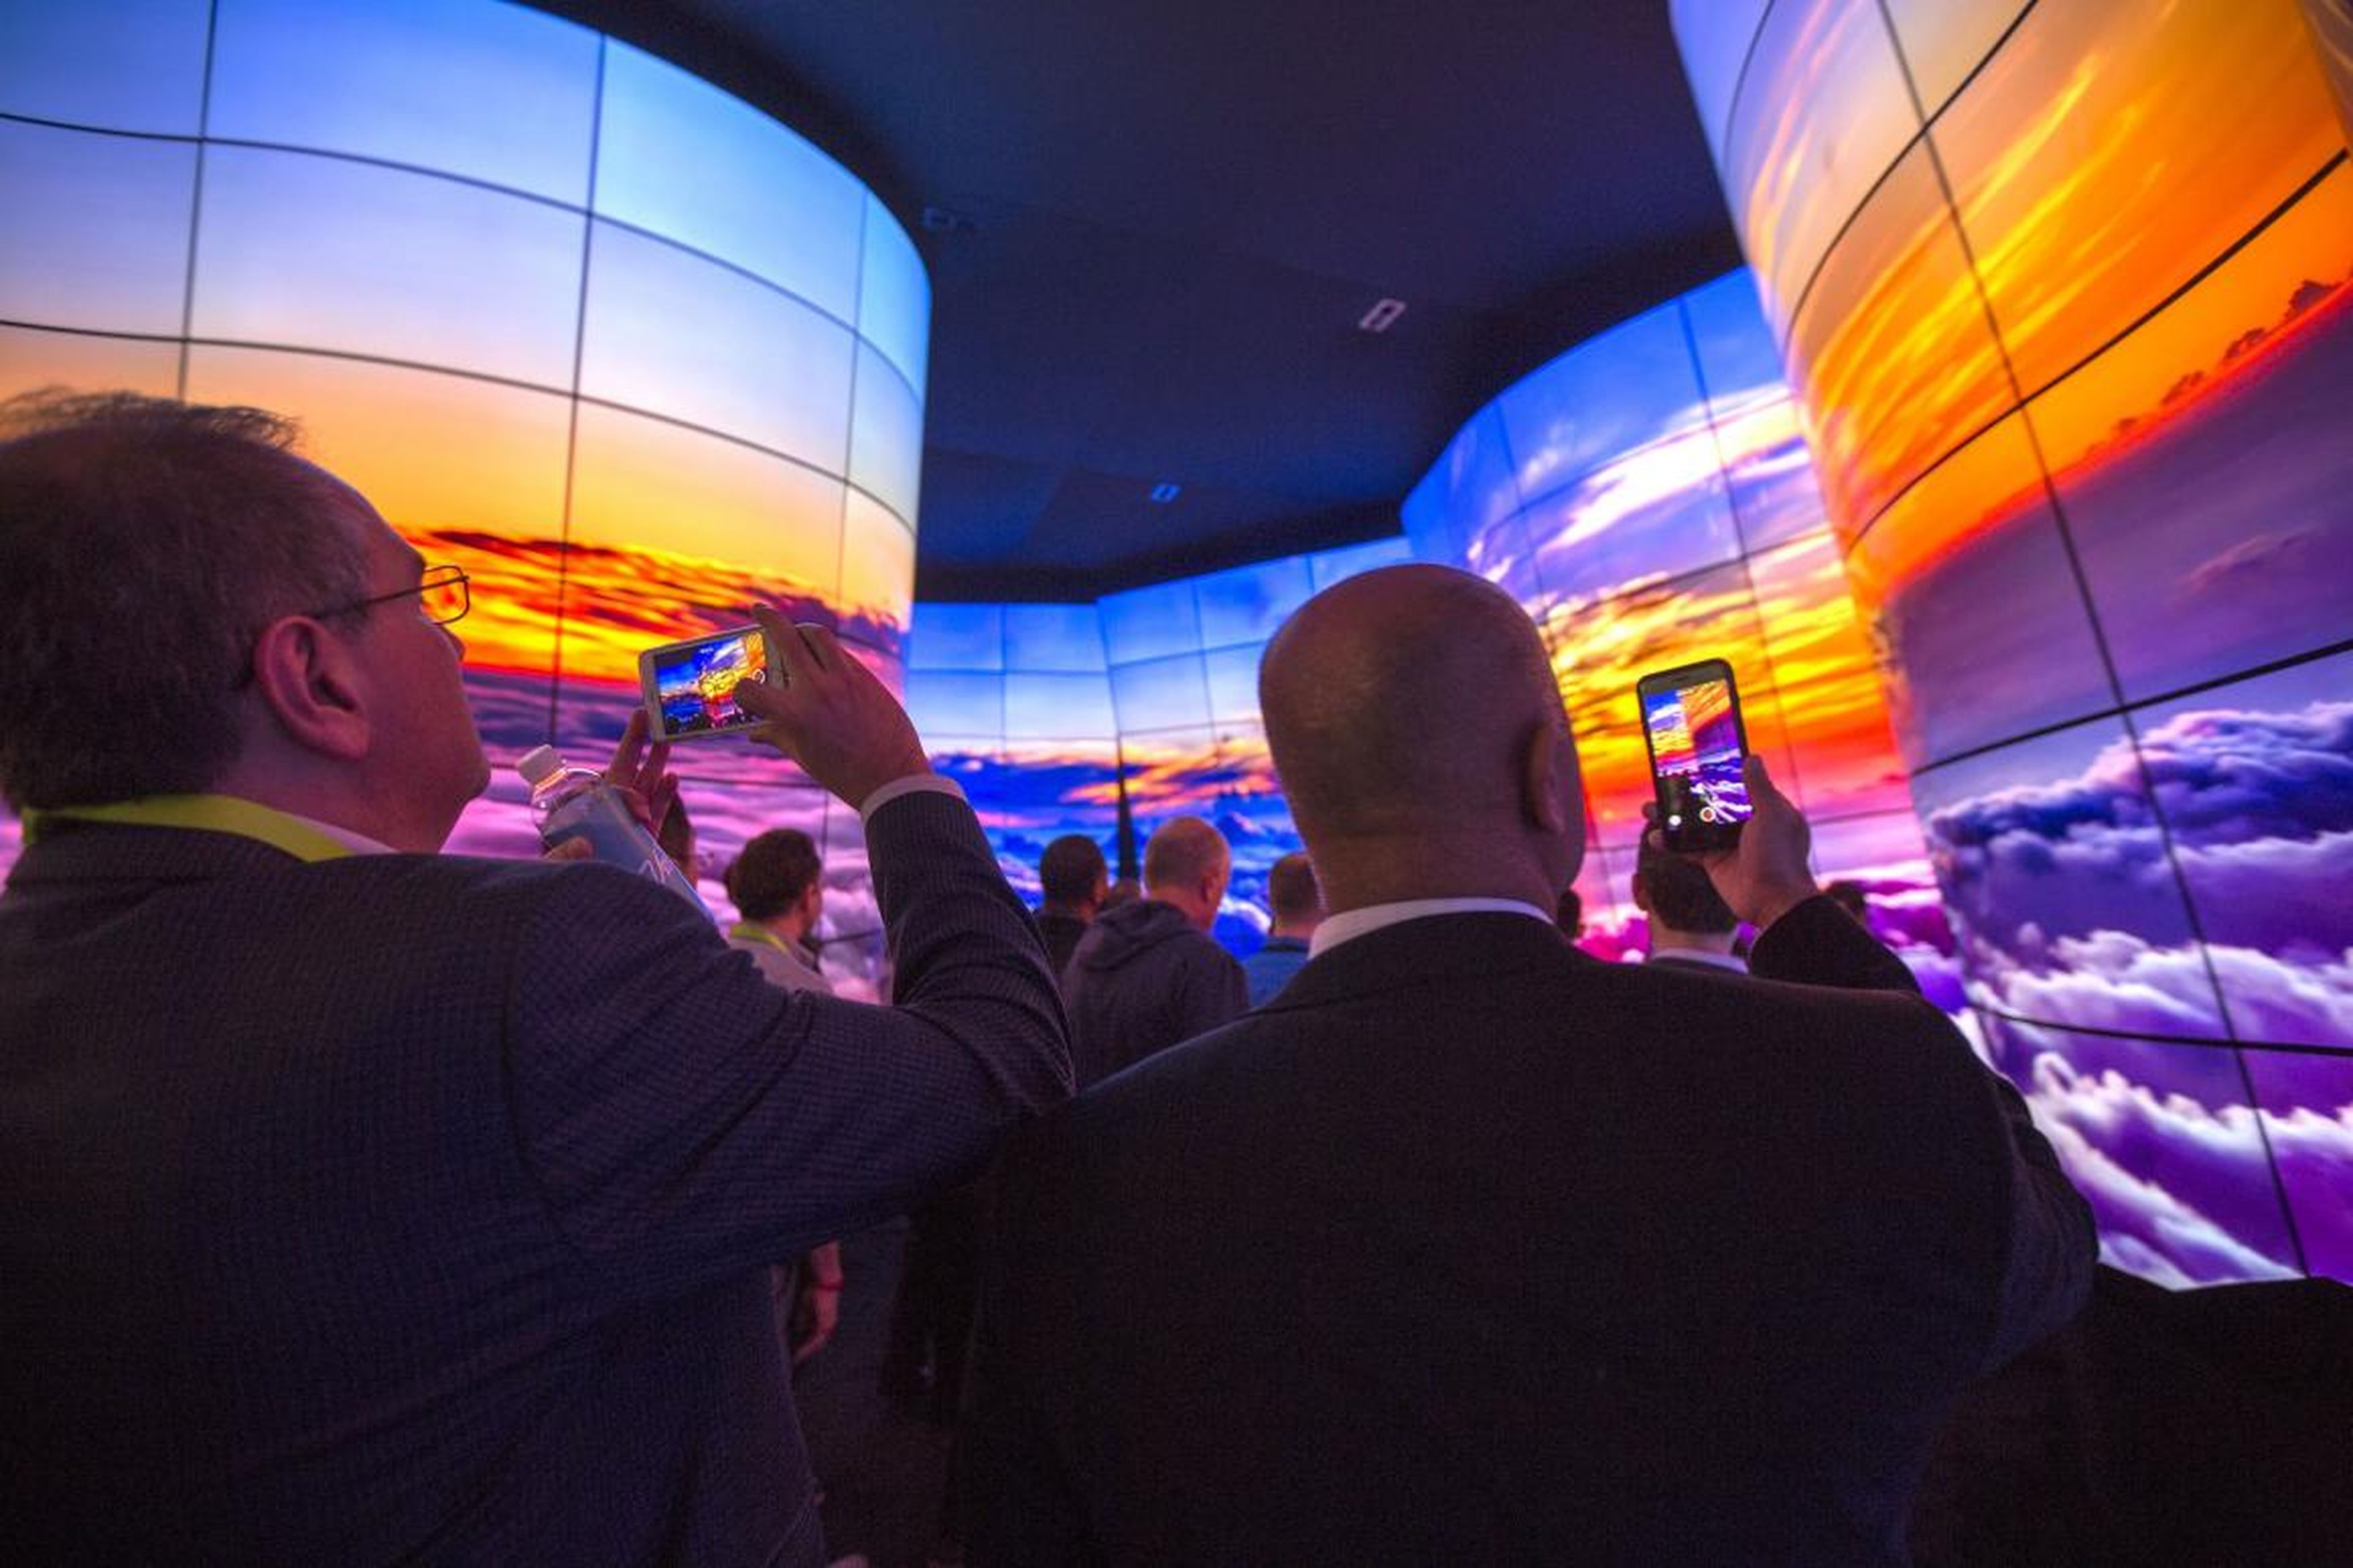 The 2019 Consumer Electronics Show runs from January 8-11.